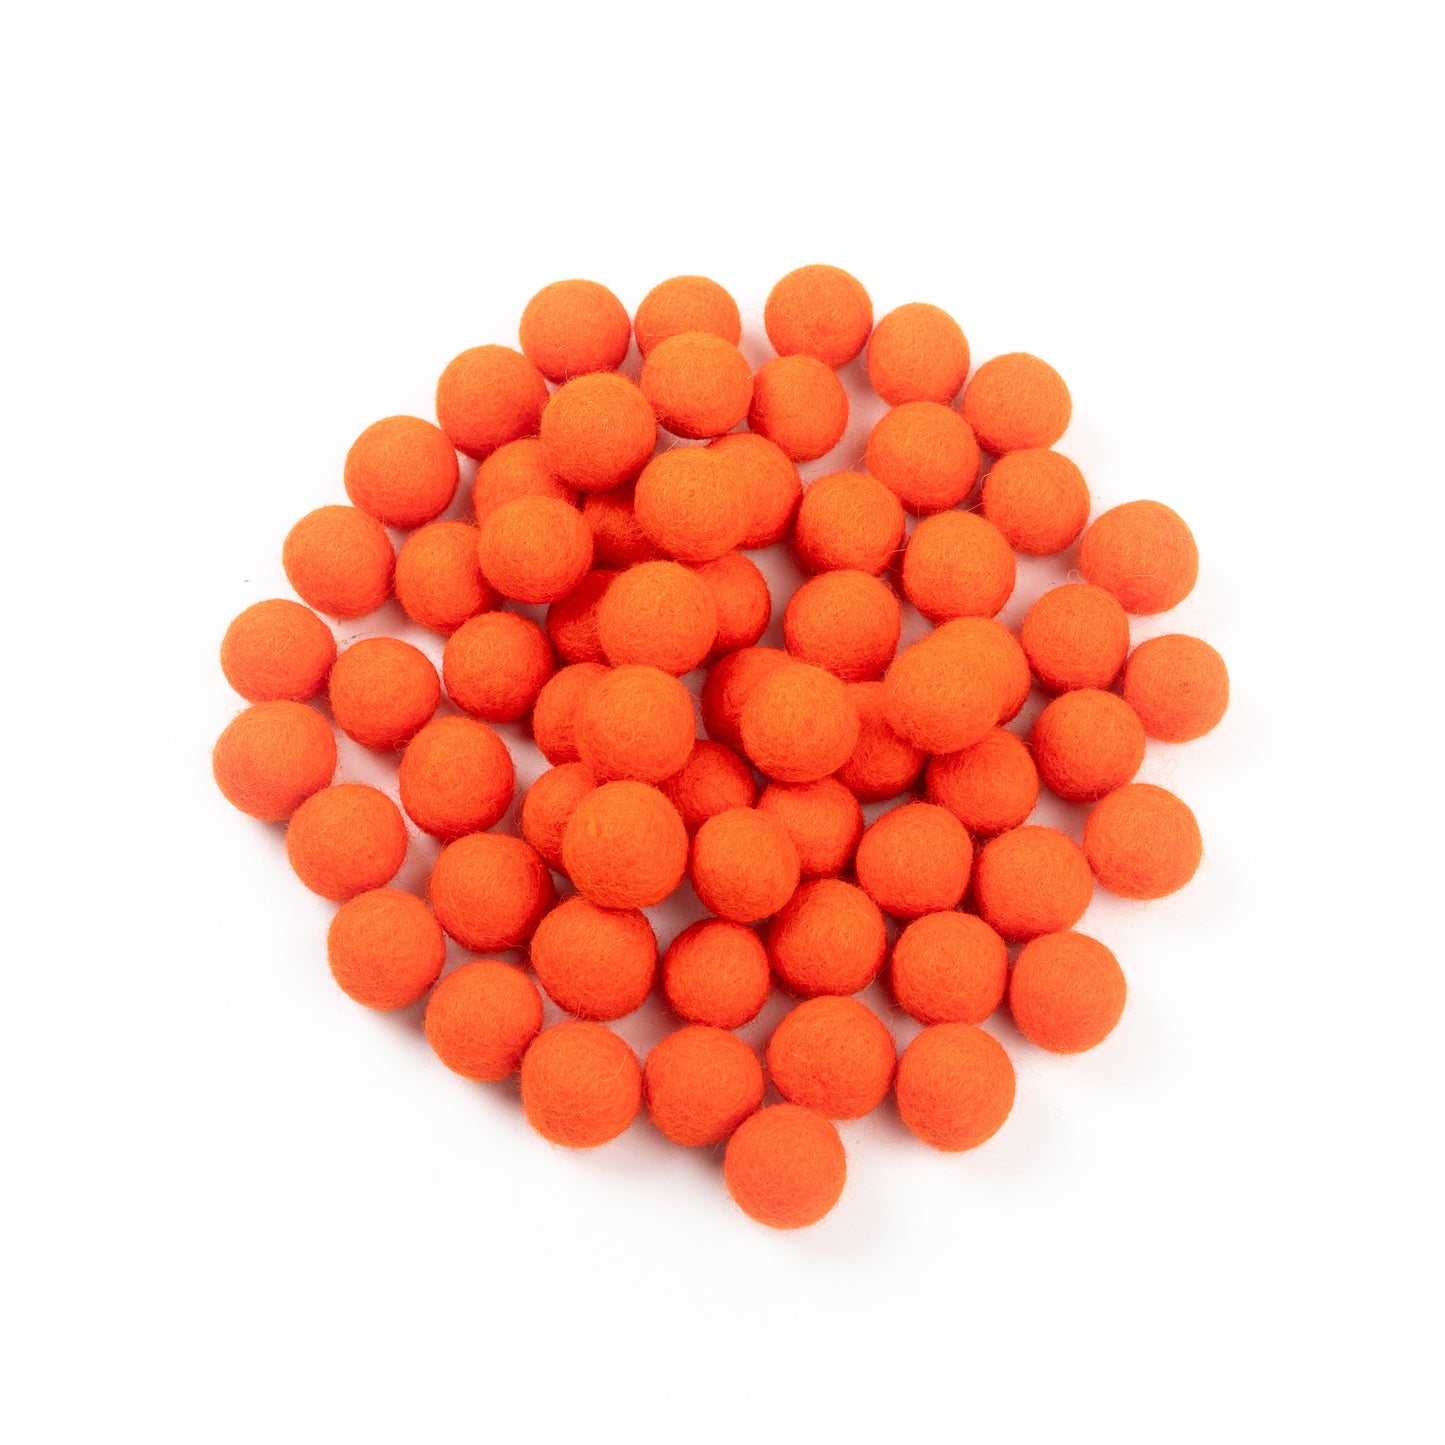 Soft and Versatile 2 cm Felt Balls Perfect for Home Decor and Crafts